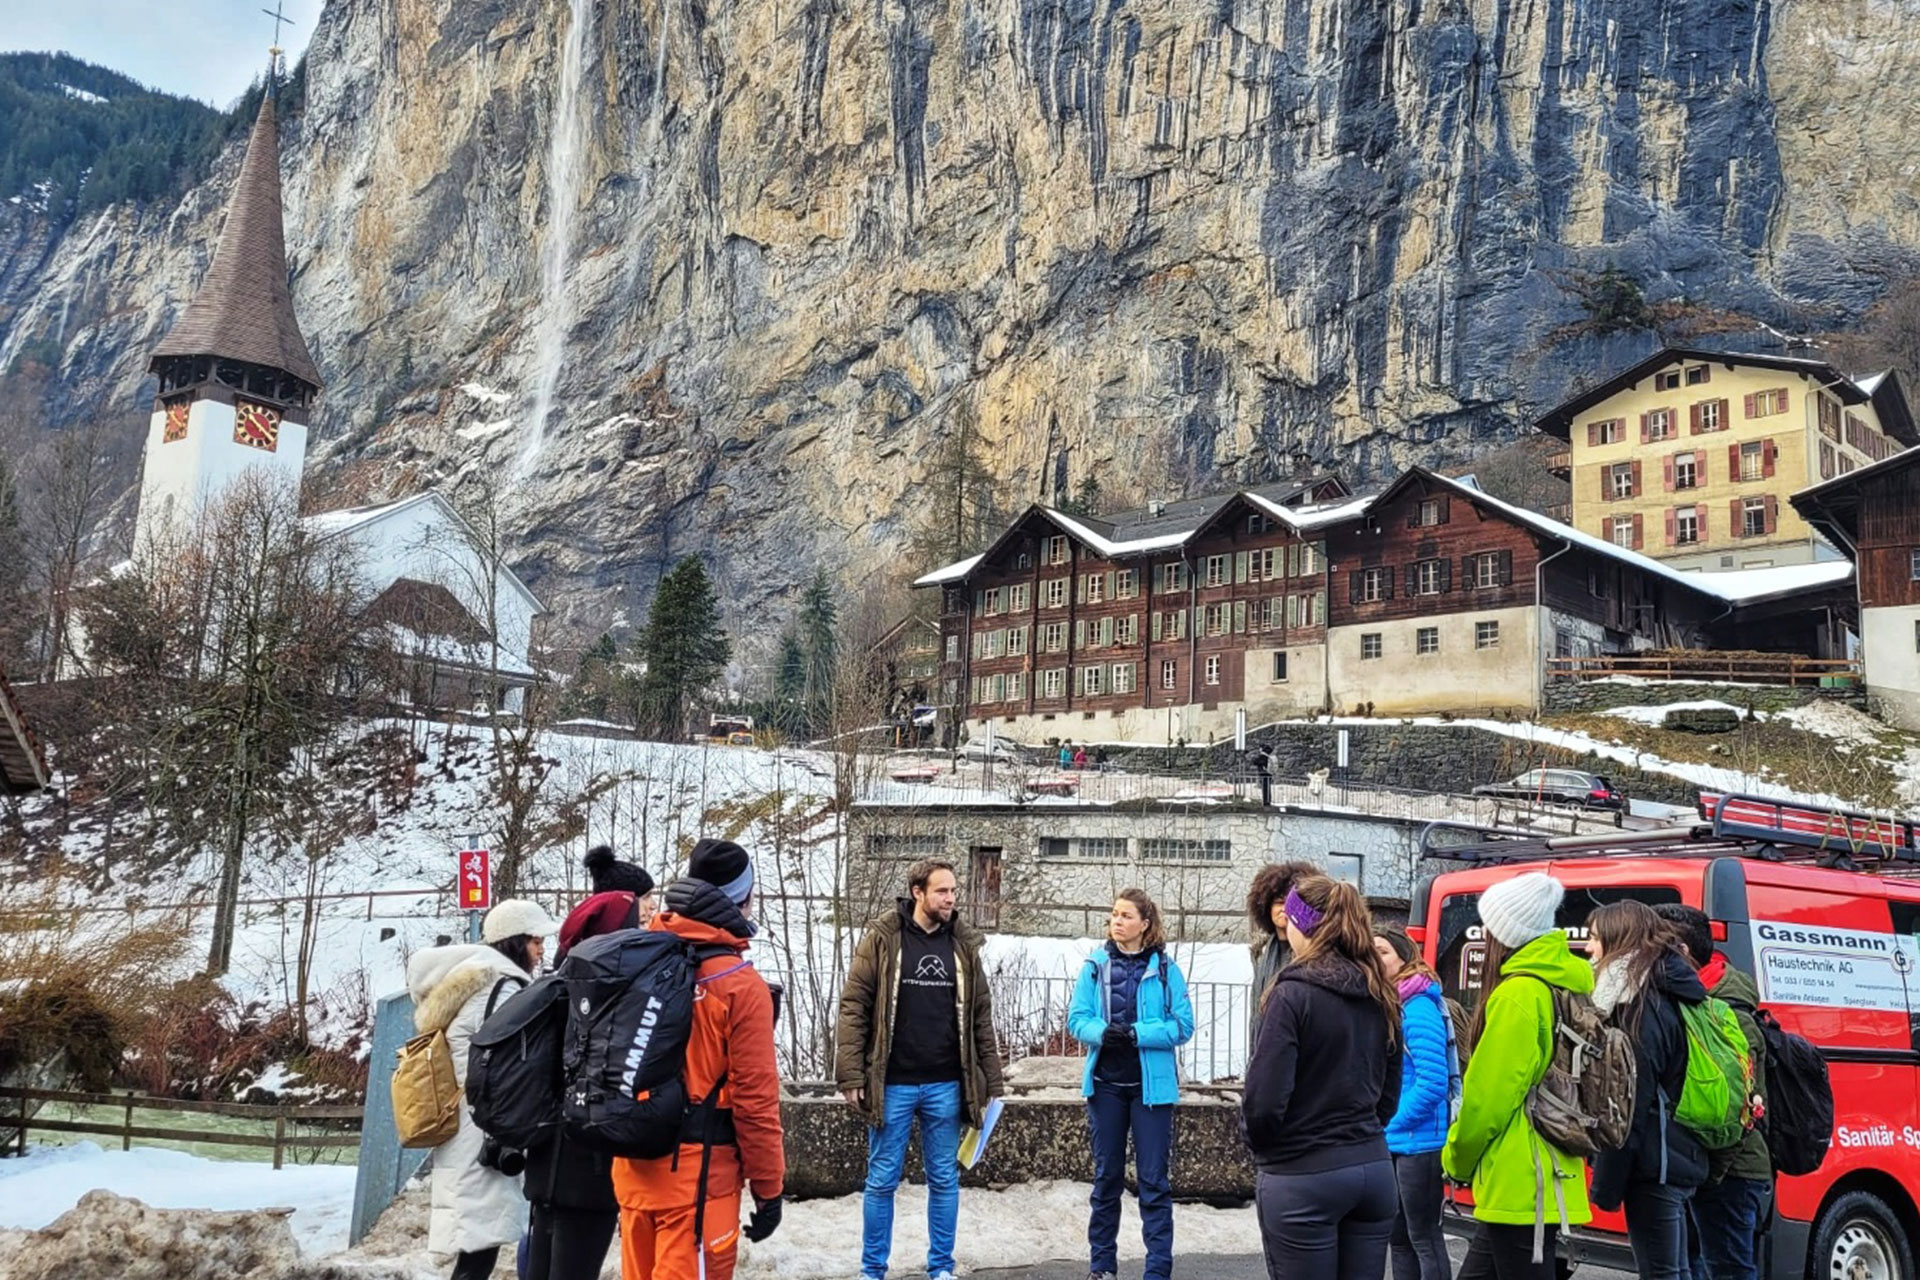 Best of Bernese Alps Private Day Tour: Visit of Lauterbrunnen, Mürren, Grindelwald, Interlaken in the Jungfrau Region (View on Eiger, Mönch and Jungfrau) (from Lucerne)